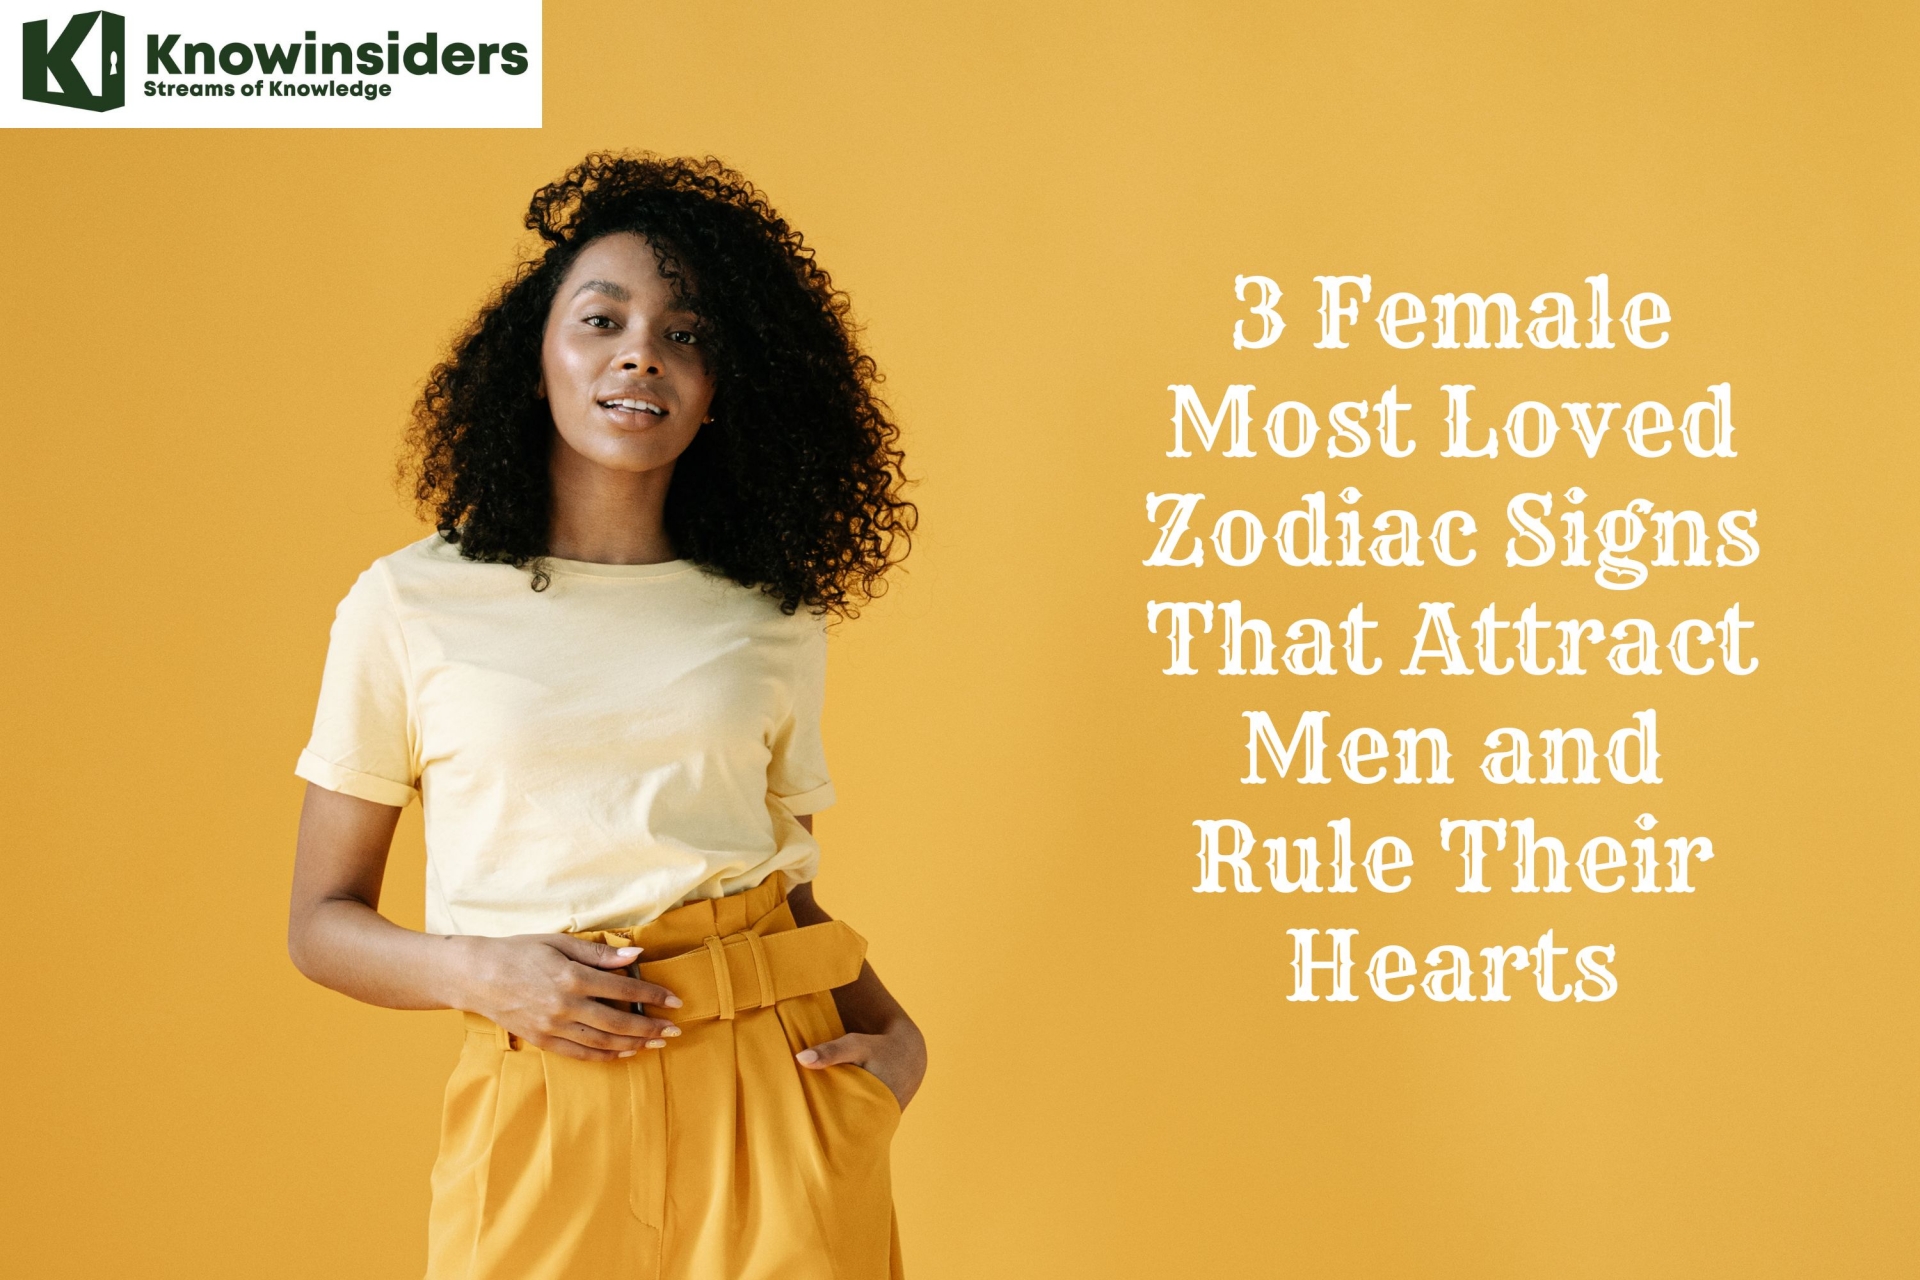 3 Female Most Loved Zodiac Signs That Attract Men and Rule Their Hearts